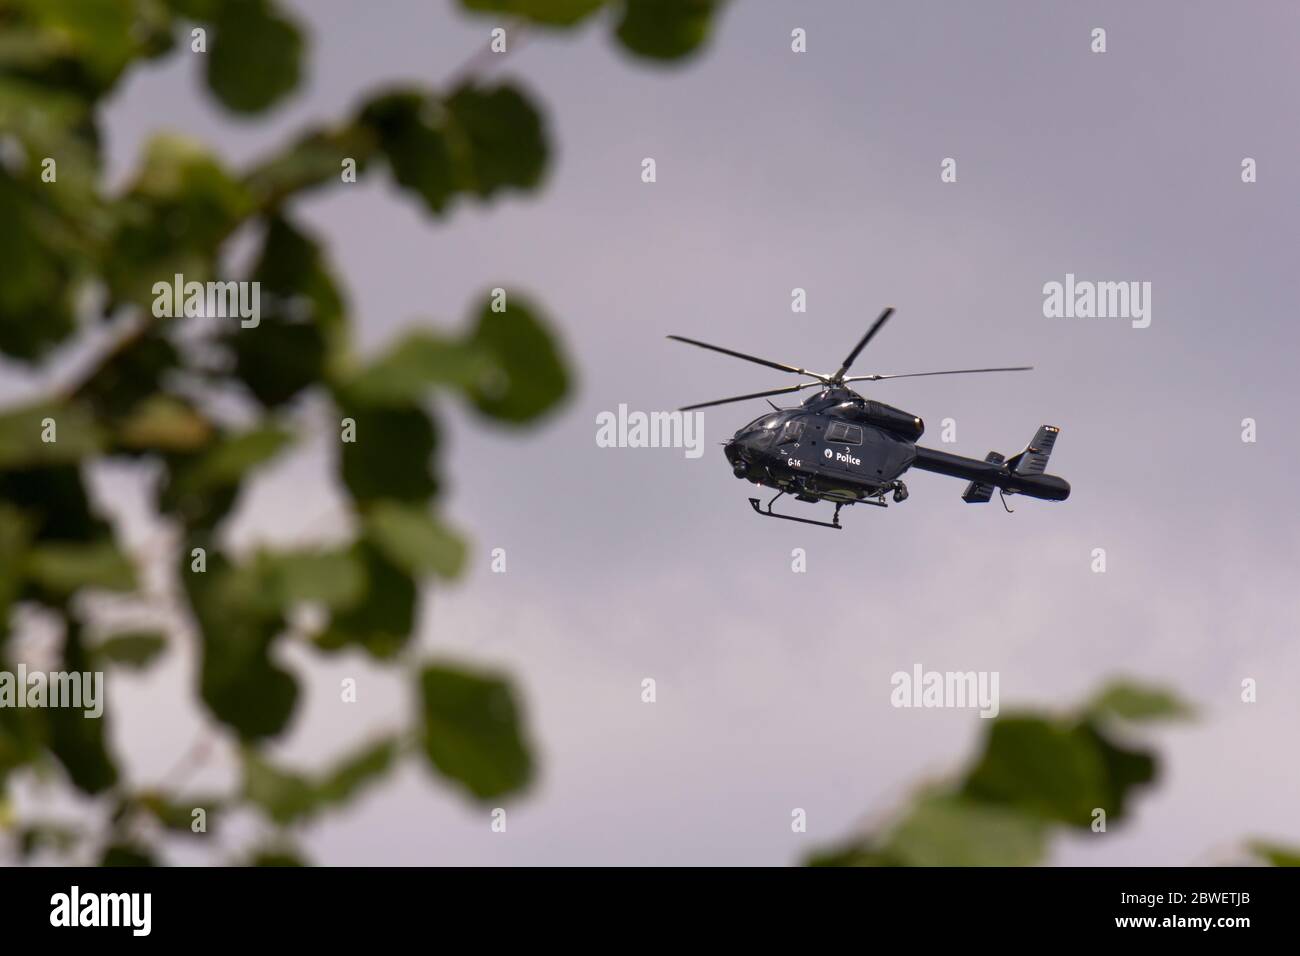 Airborne police helicopter (G-16) against cloudy sky. Stock Photo